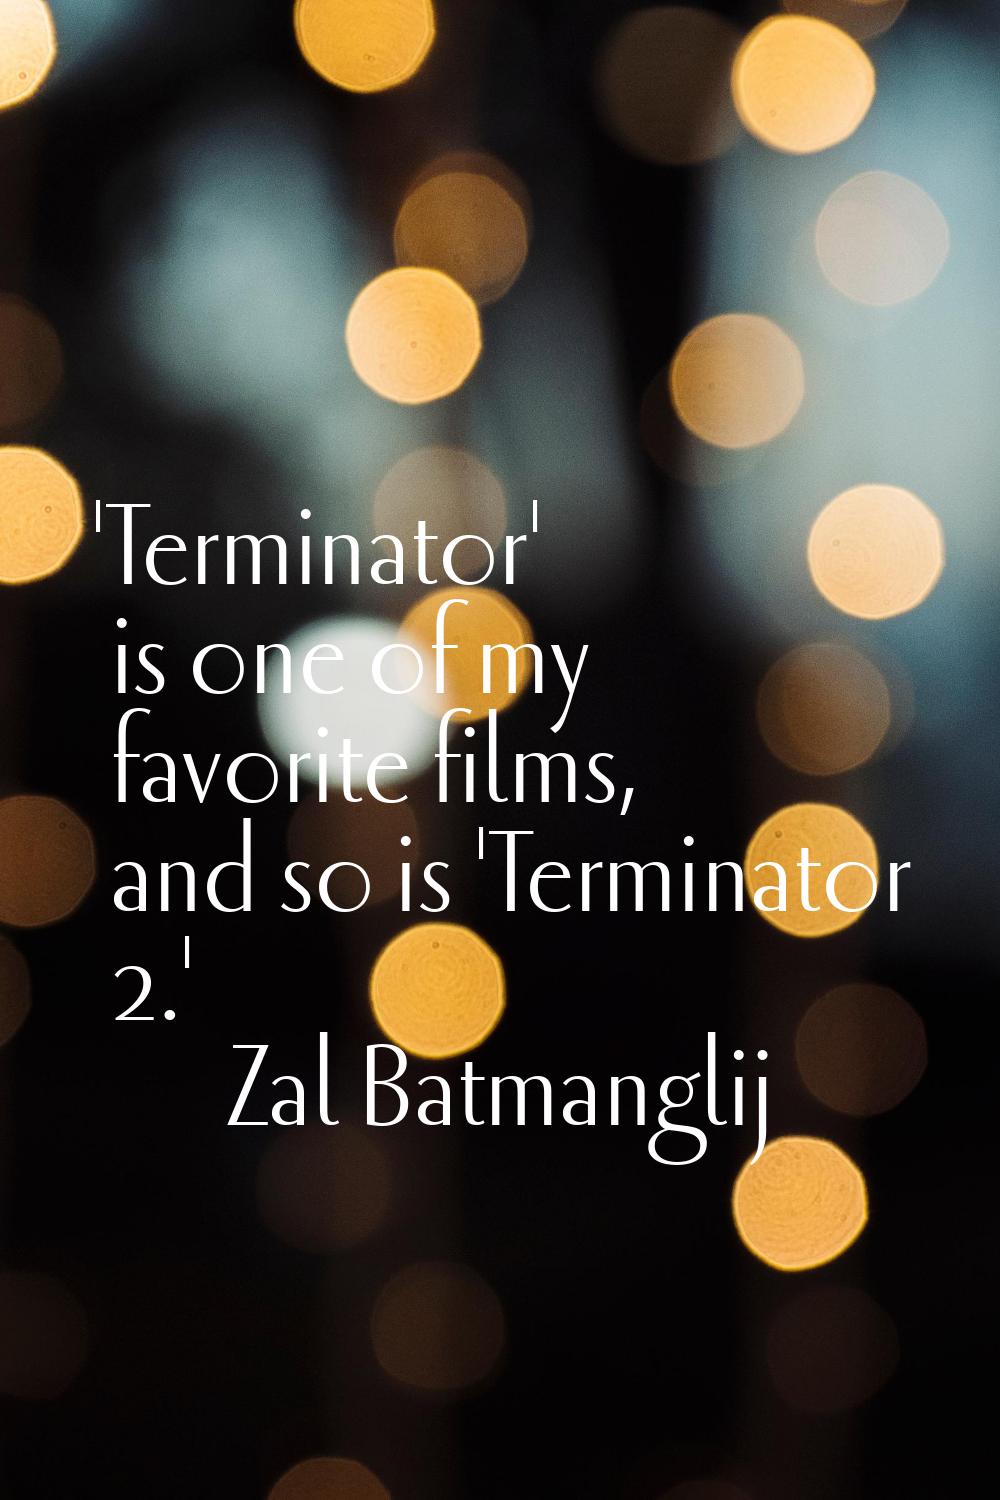 'Terminator' is one of my favorite films, and so is 'Terminator 2.'